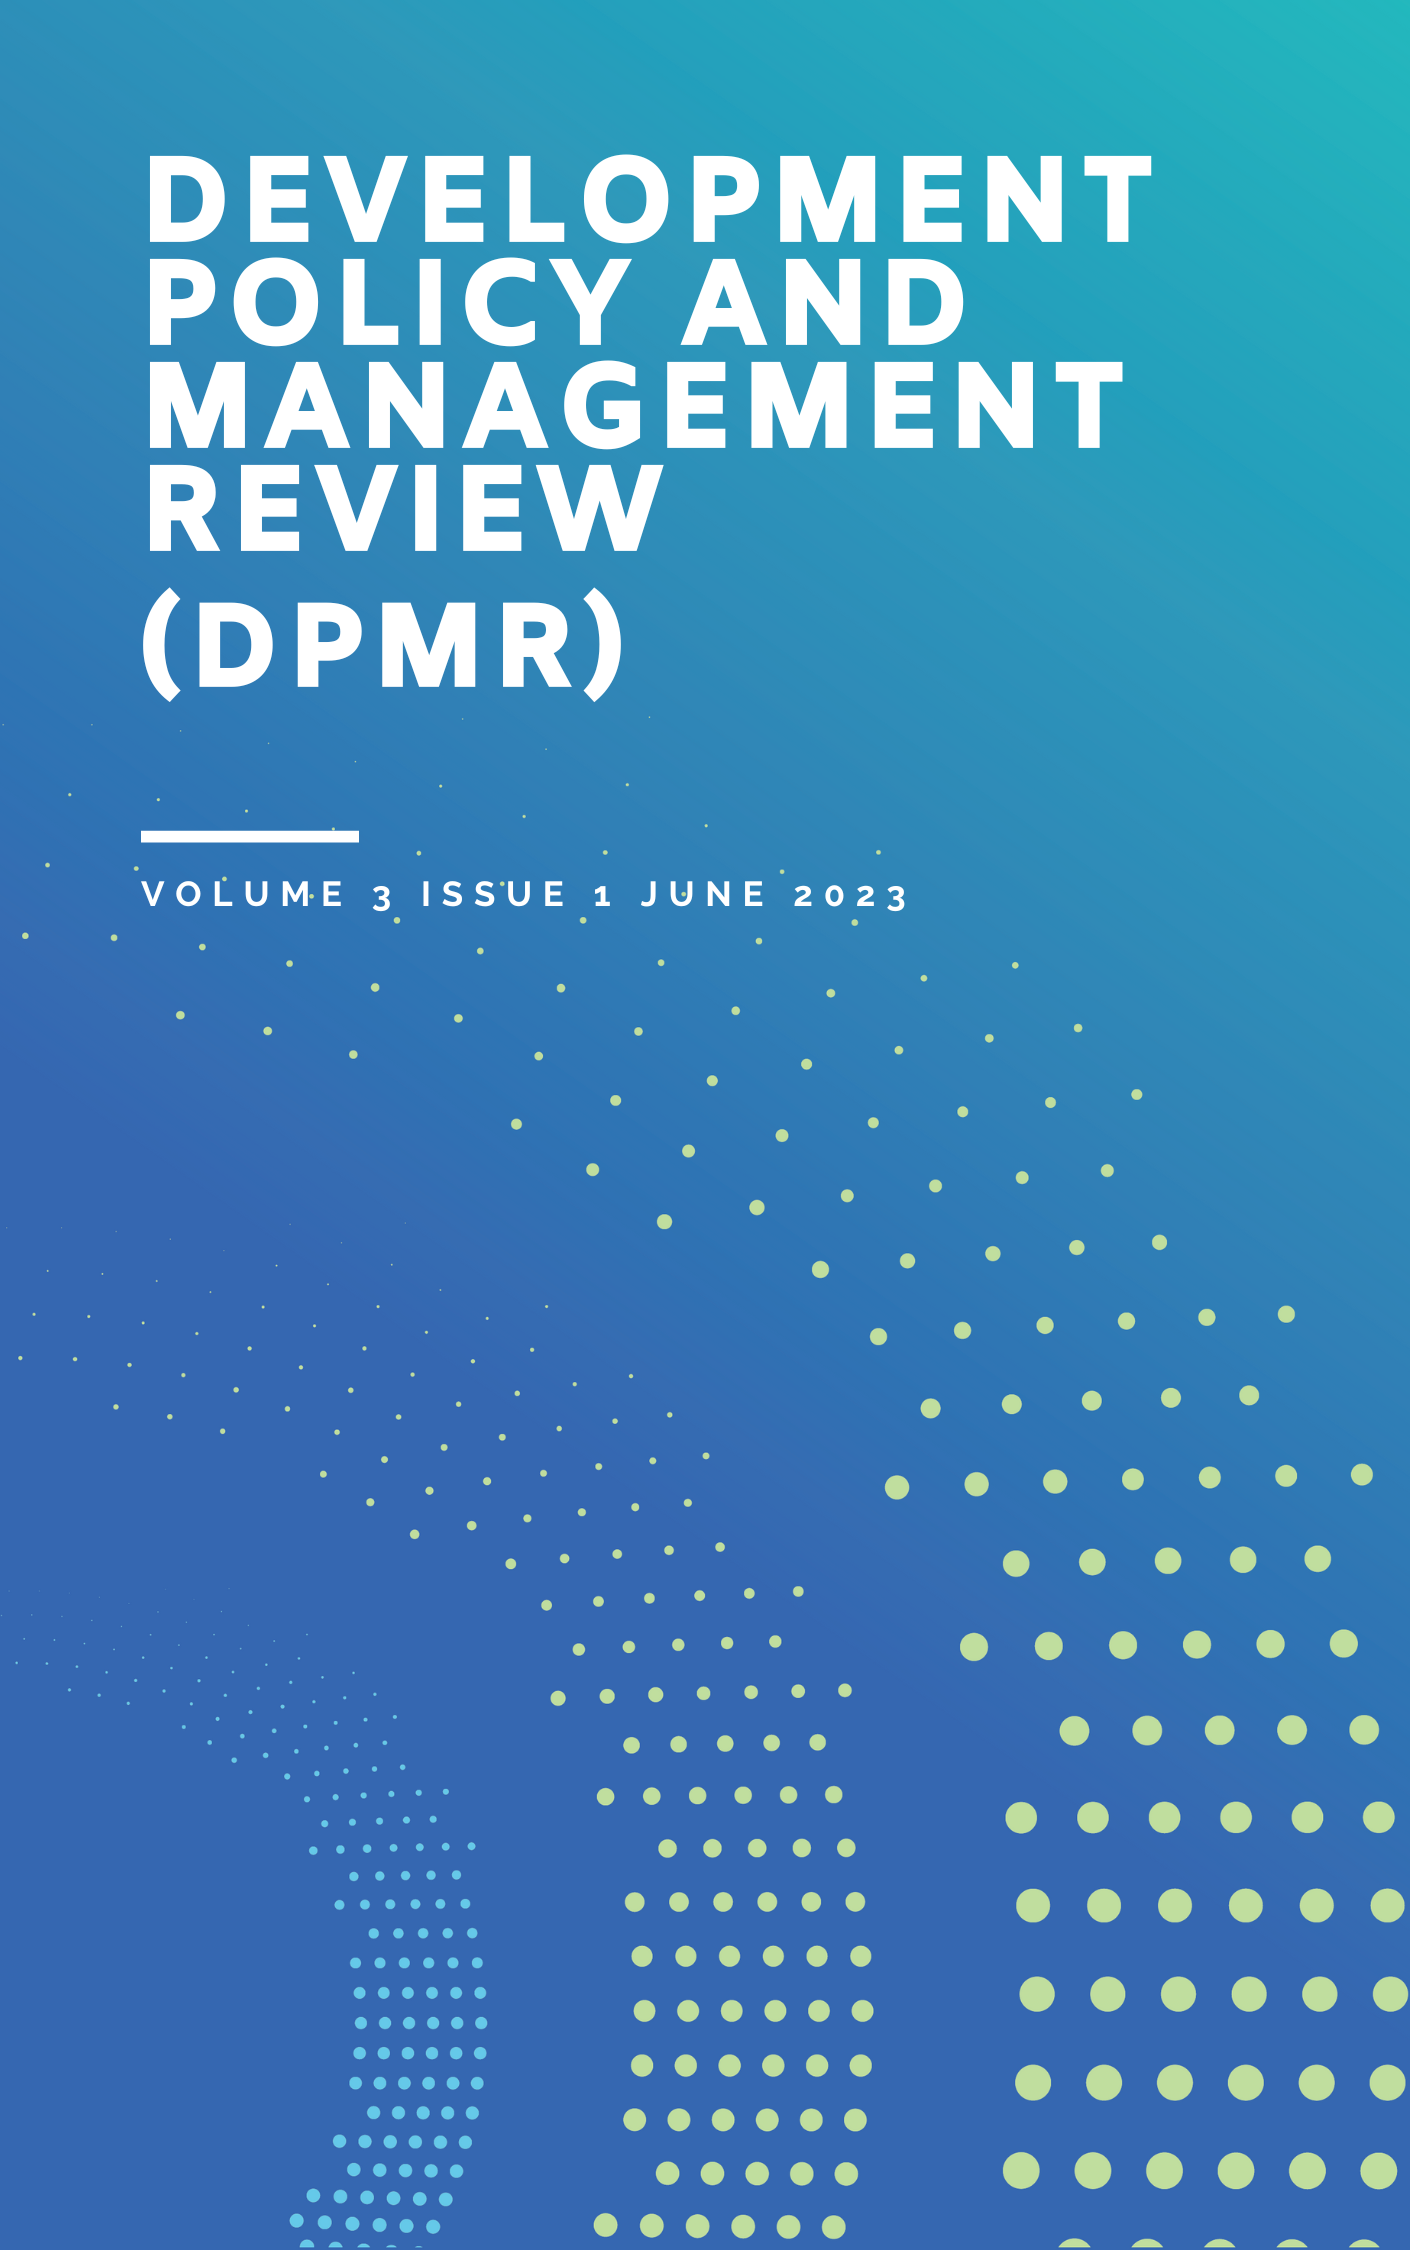 					View Volume 3 Issue 1 June 2023
				